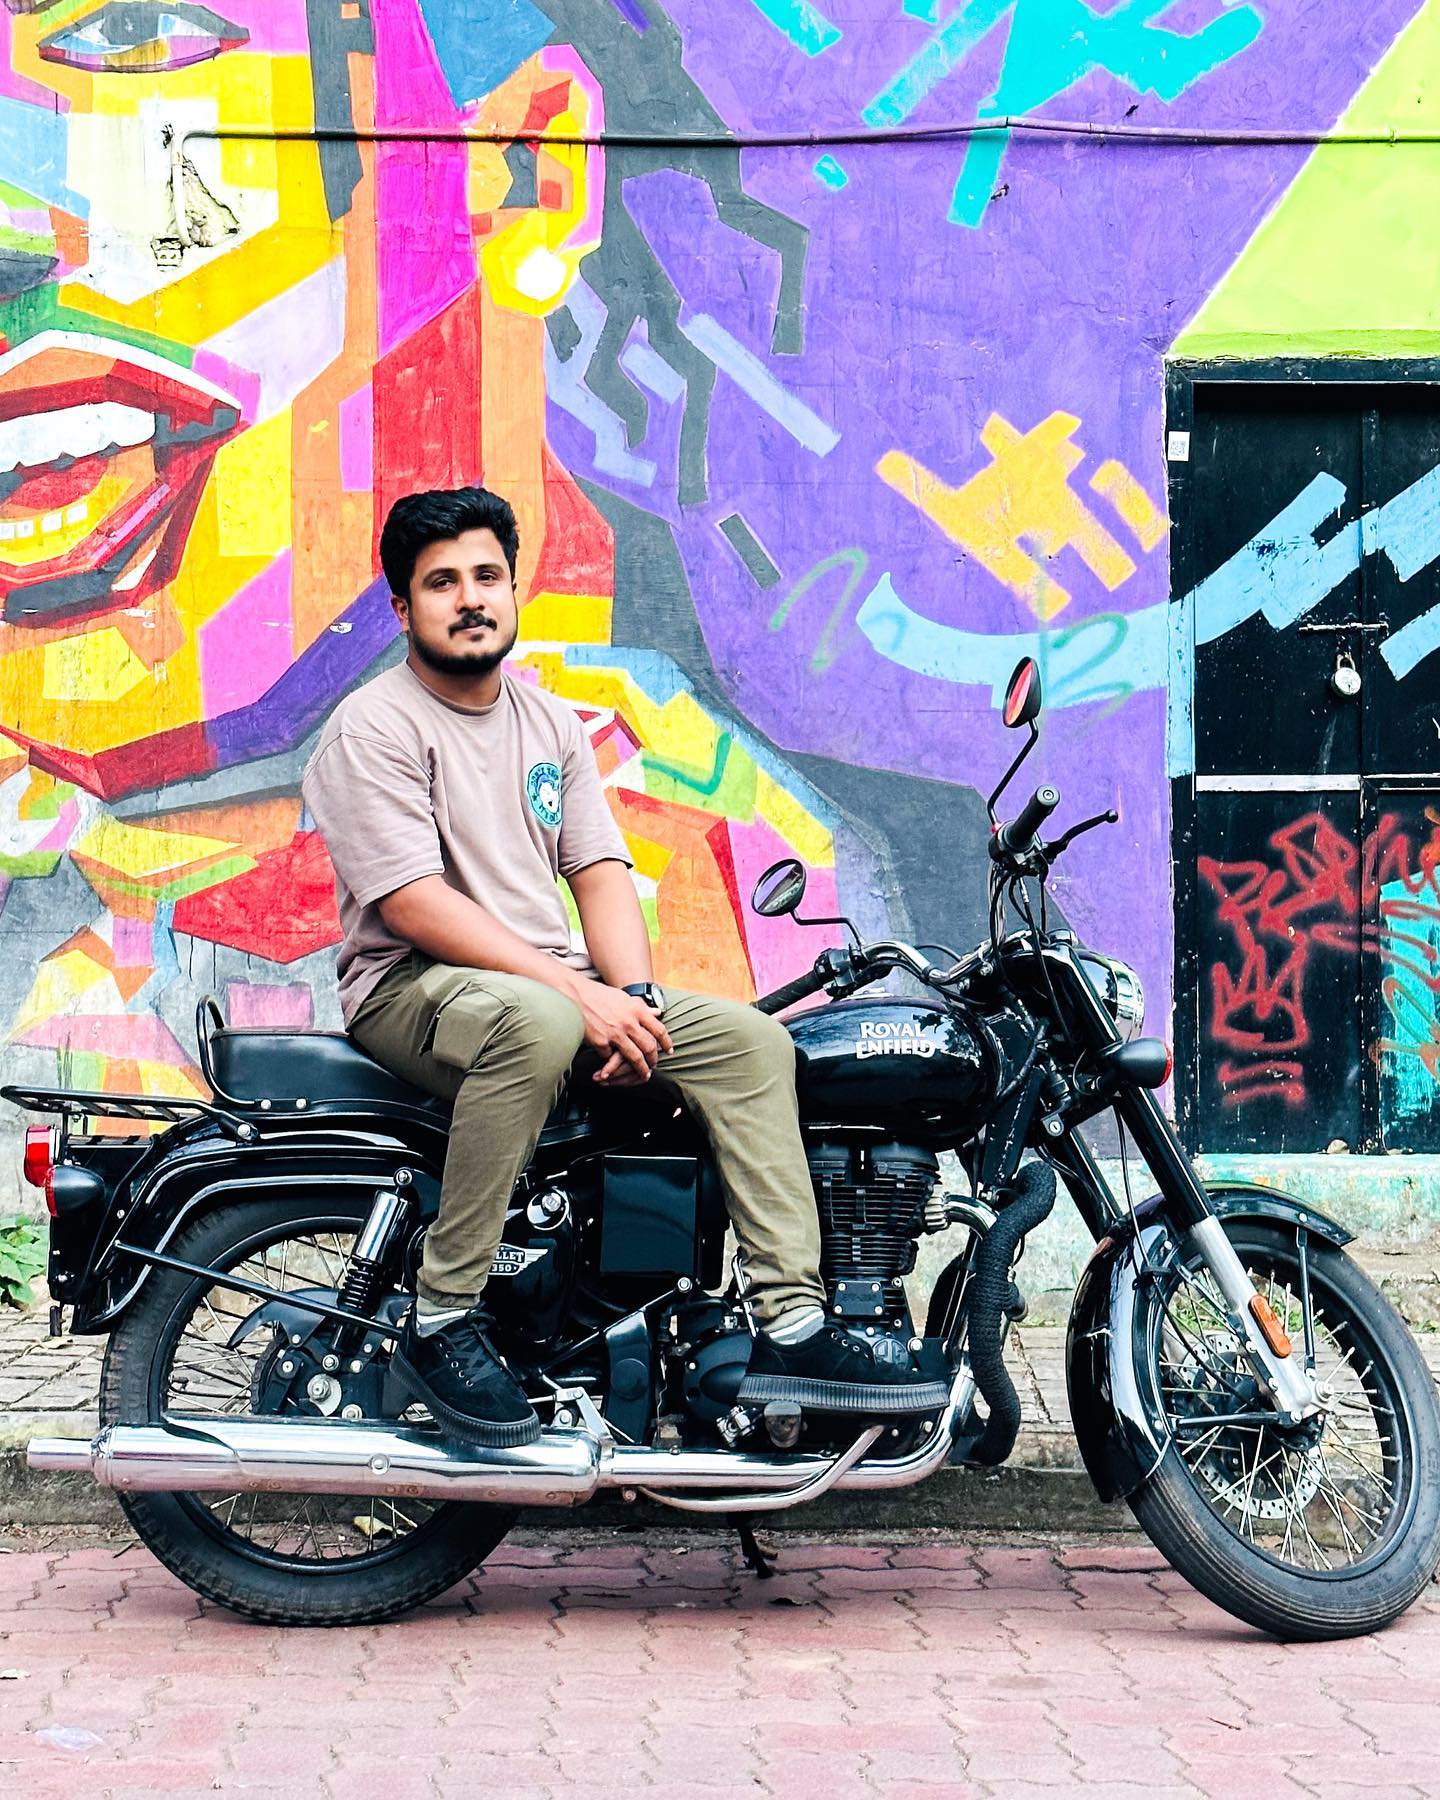 38 Young Man On Royal Enfield Images, Stock Photos, 3D objects, & Vectors |  Shutterstock